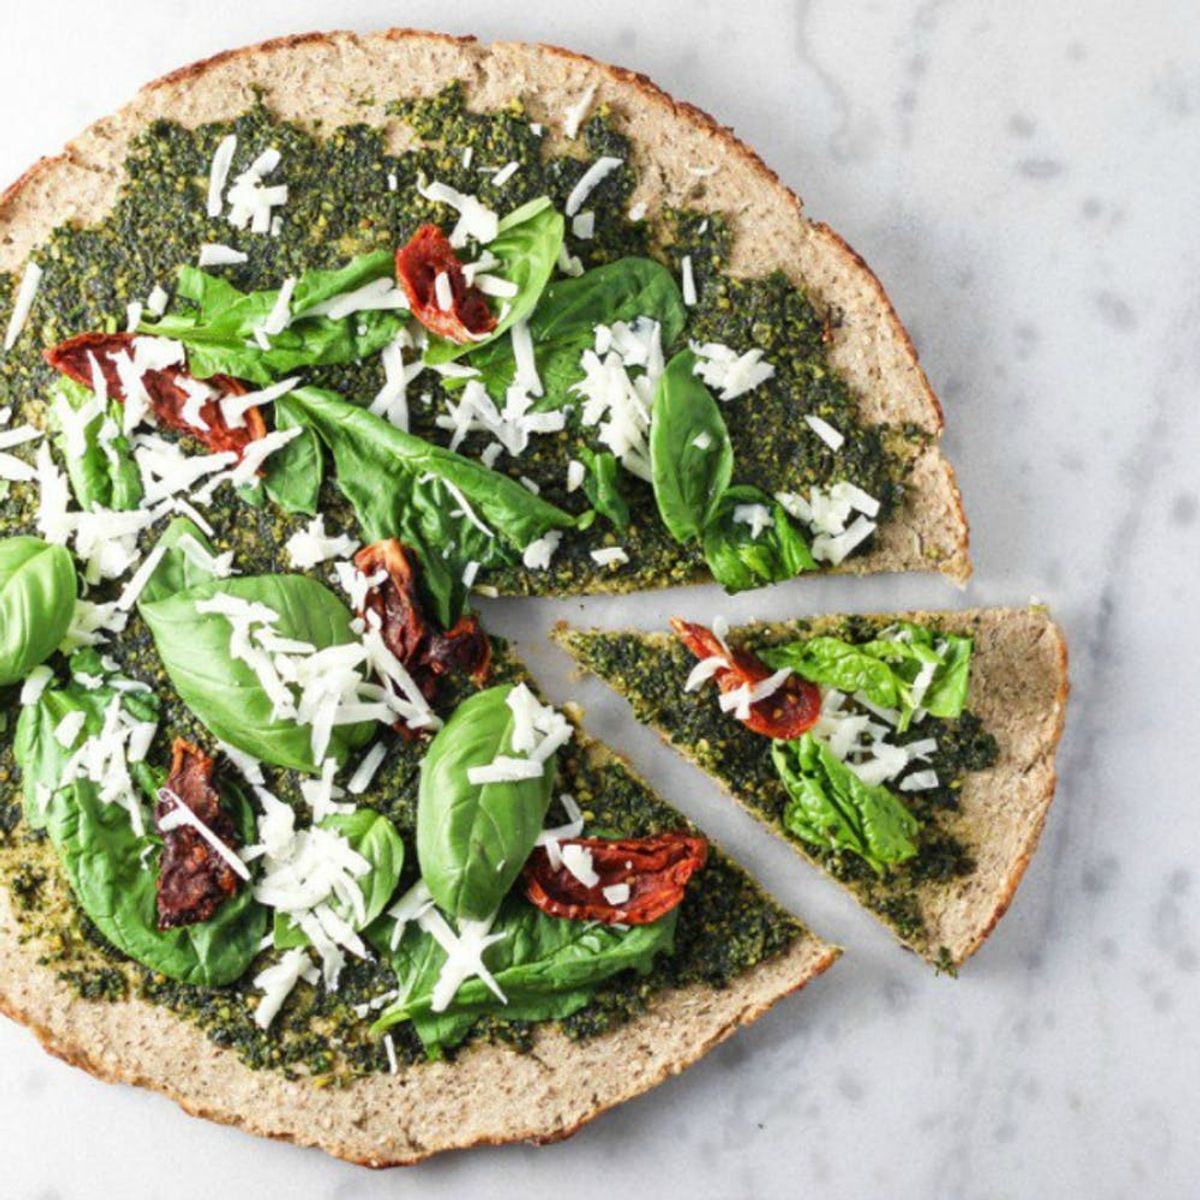 15 Buckwheat Pizzas That Are Vegetarian AND Gluten-Free